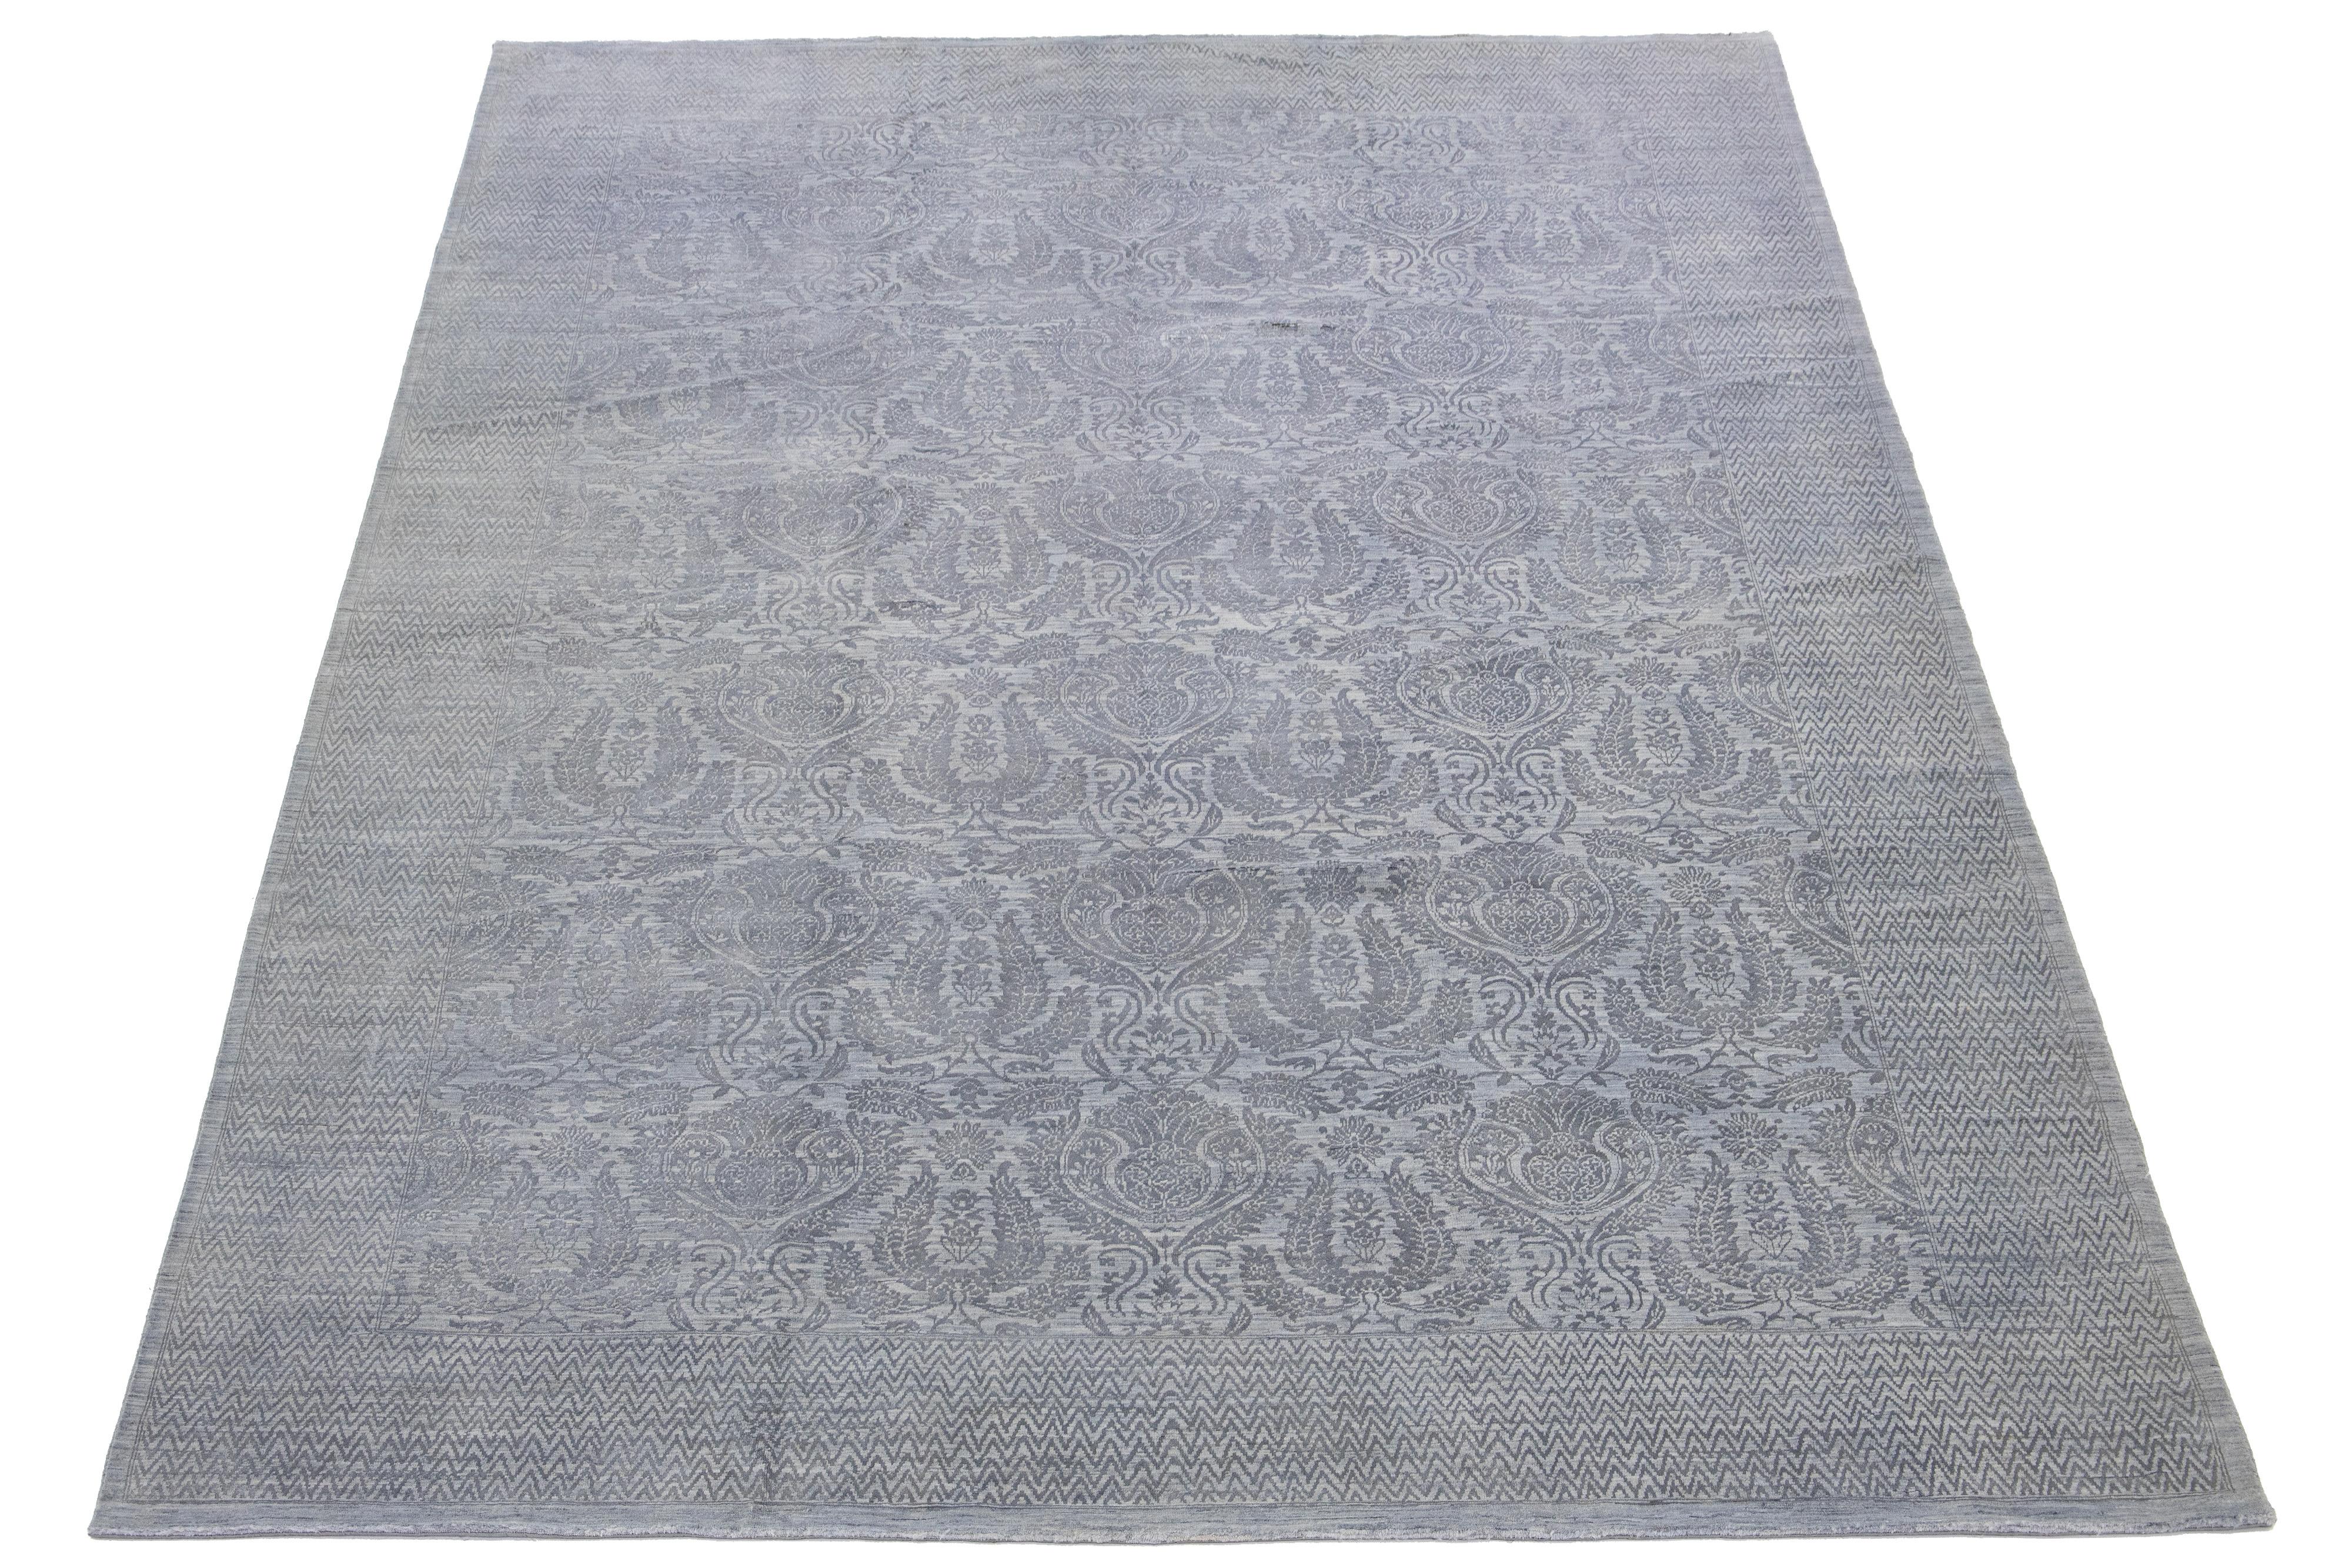 This hand-knotted wool rug showcases a light gray field. It's designed with a stunning allover floral pattern and accented with dark gray hues in a Transitional allure.

This rug measures 9'11